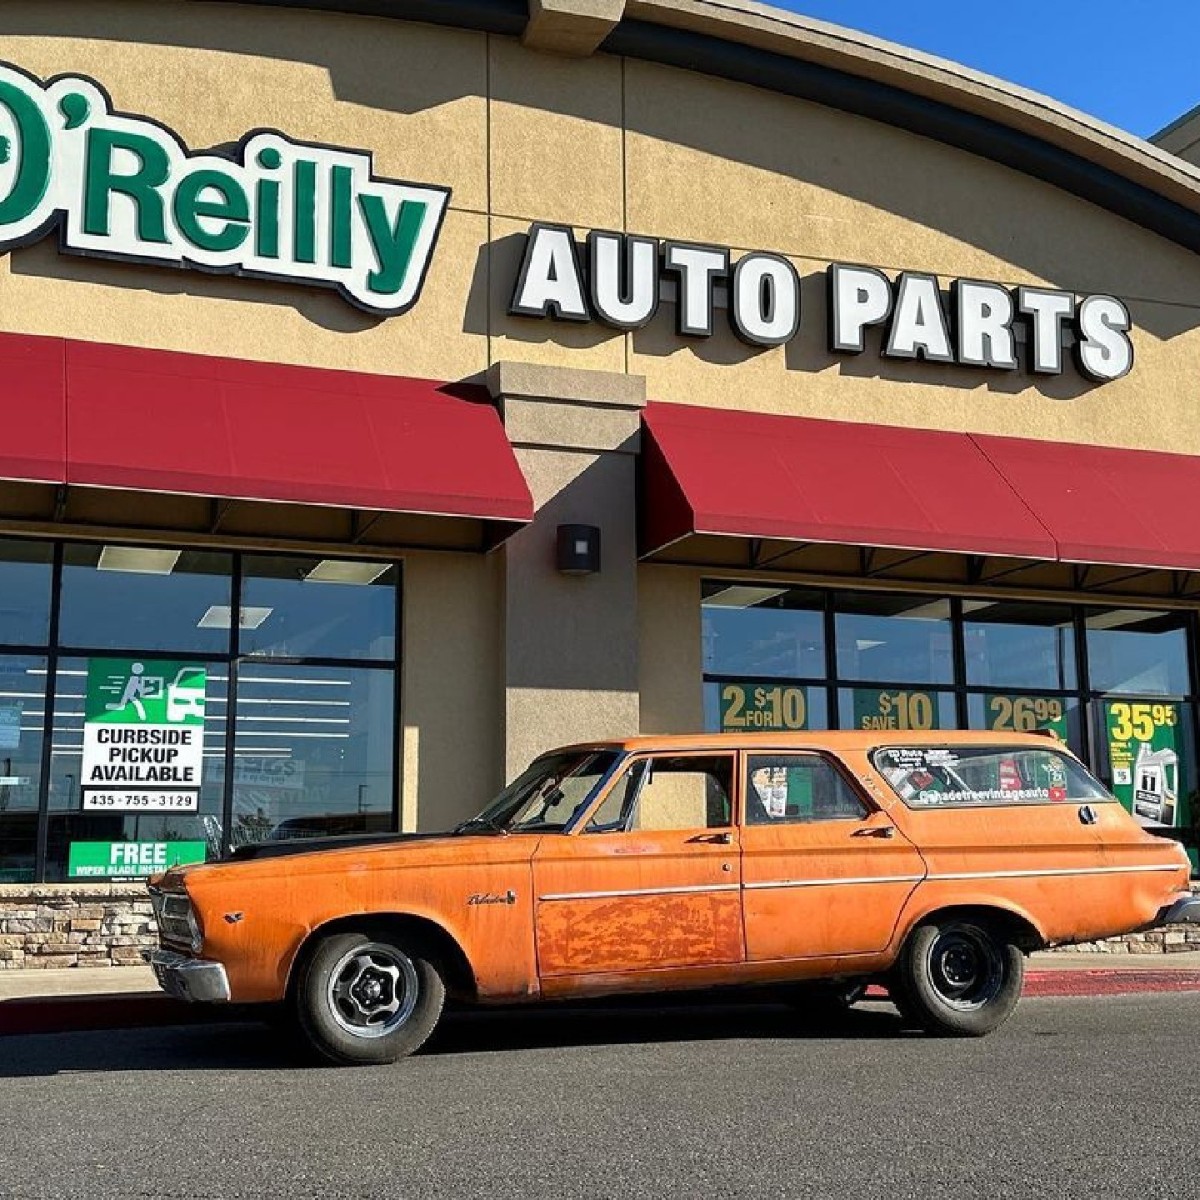 Ever wanted a family hauler that could also haul it down the drag strip? Behold the 1965 Plymouth Belvedere. #OReillyPowered 📸 shadetreevintageauto